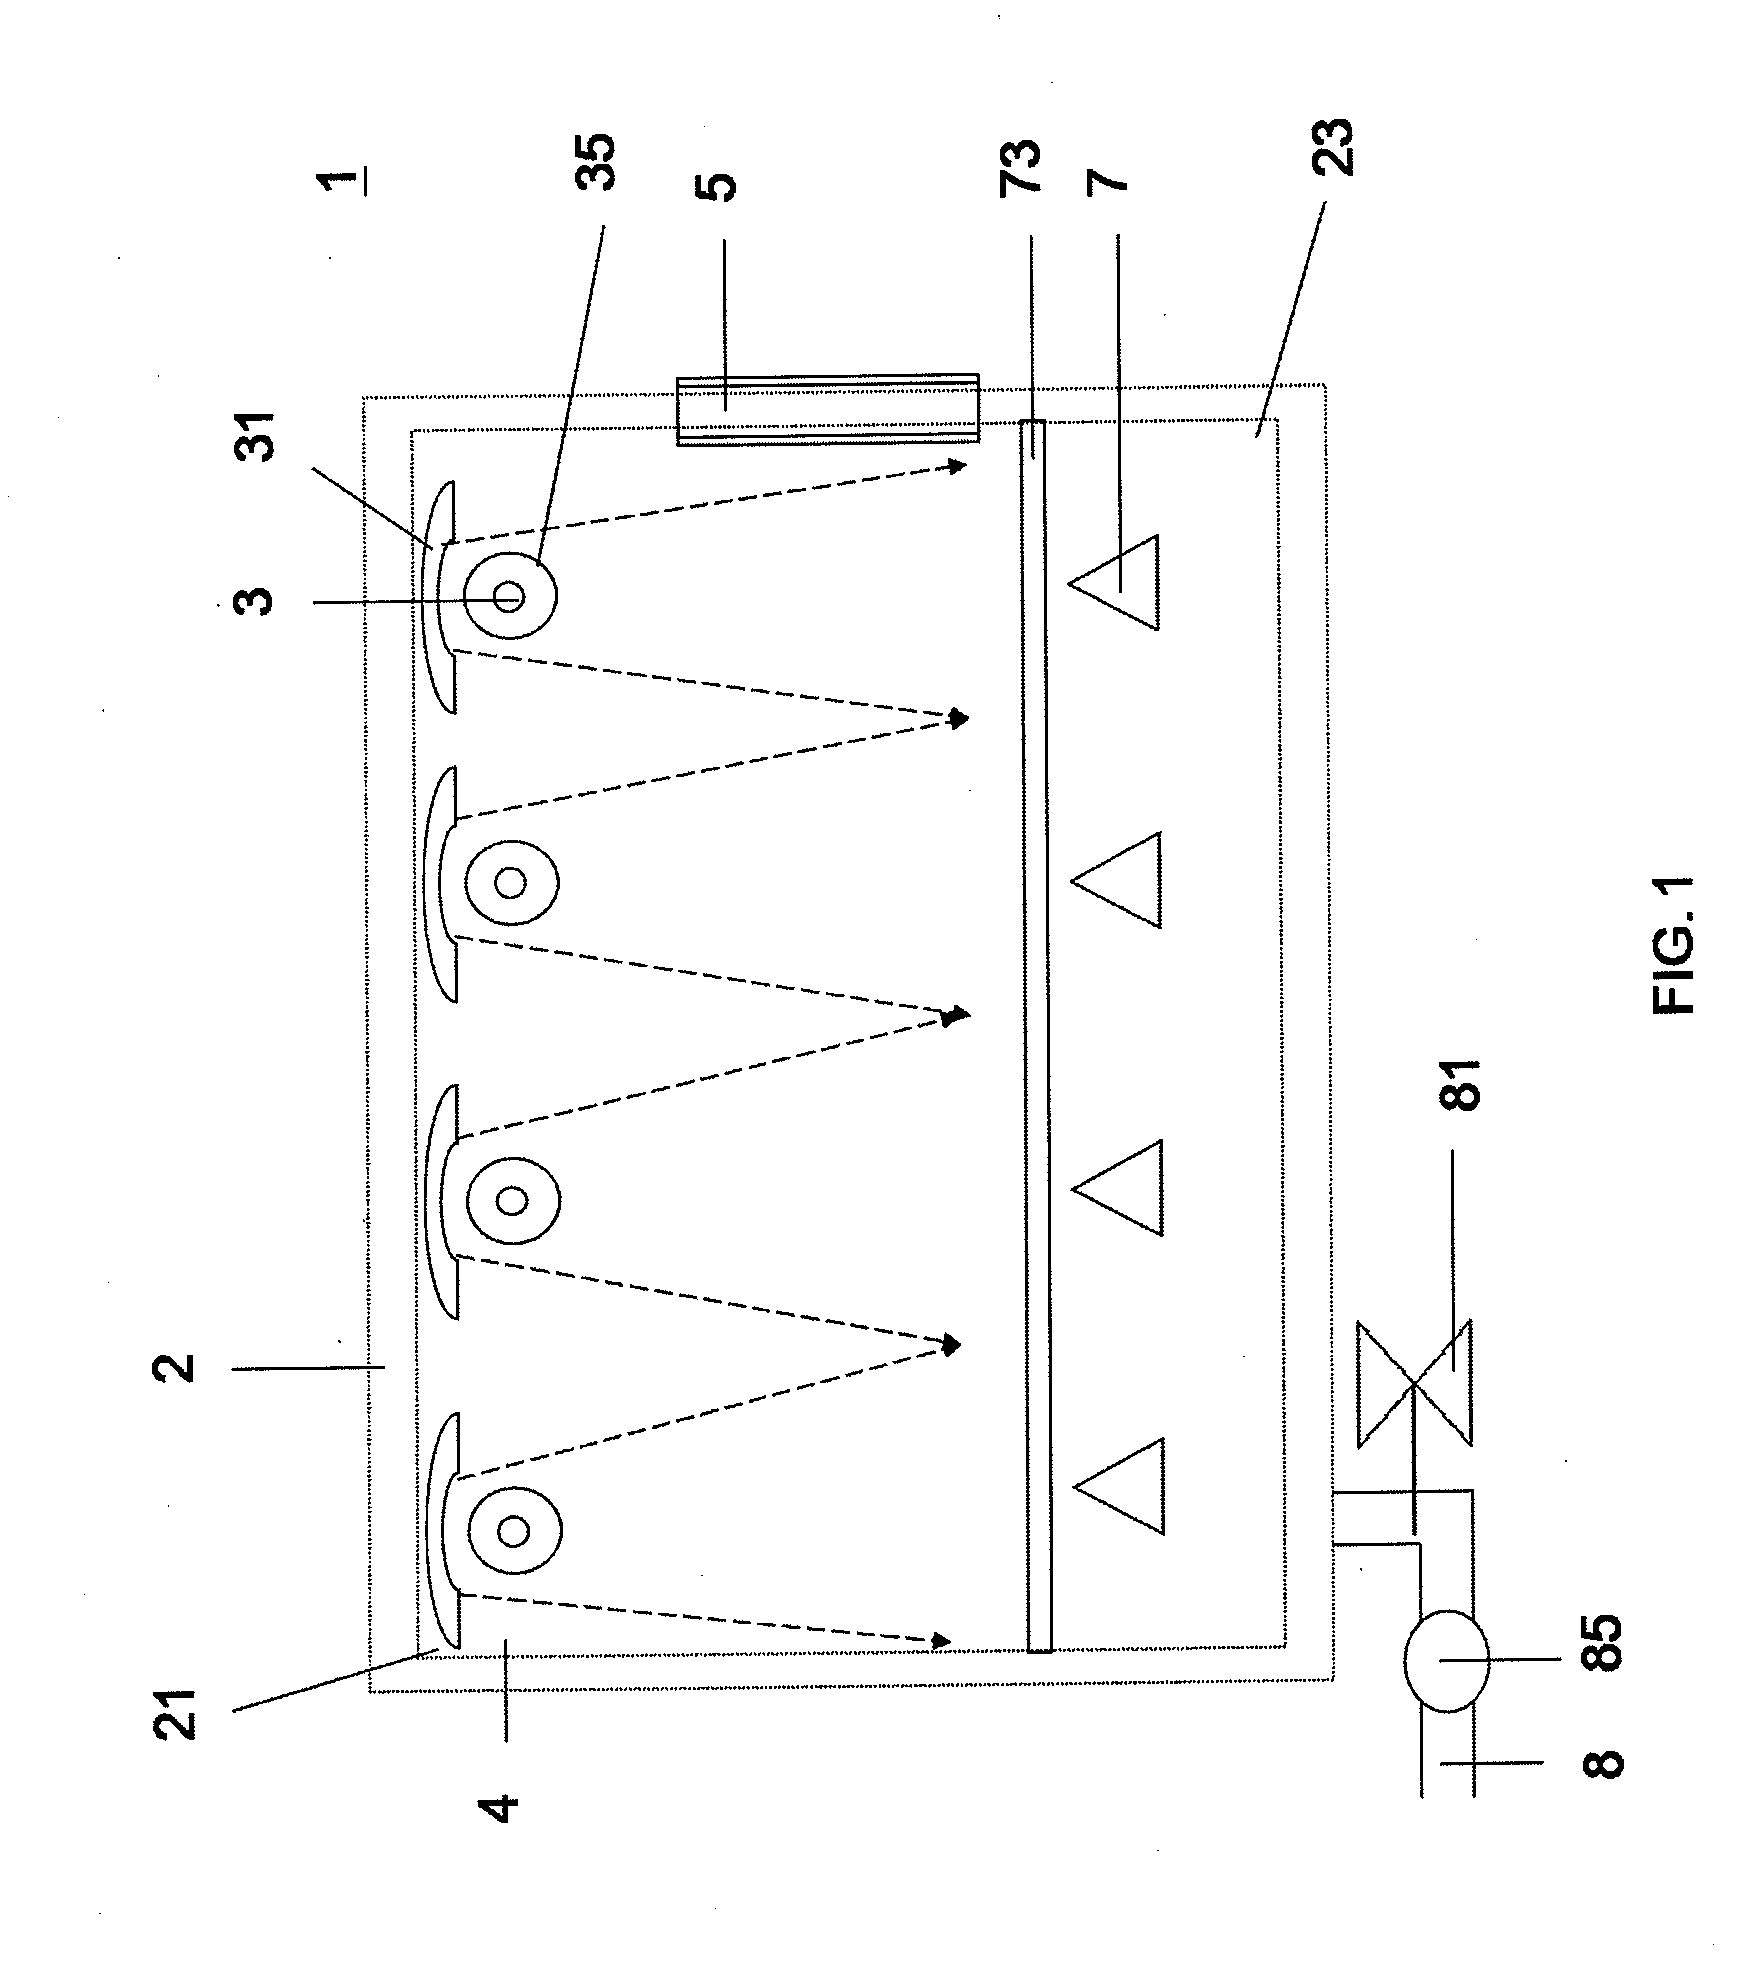 Equipment for substrate surface treatment